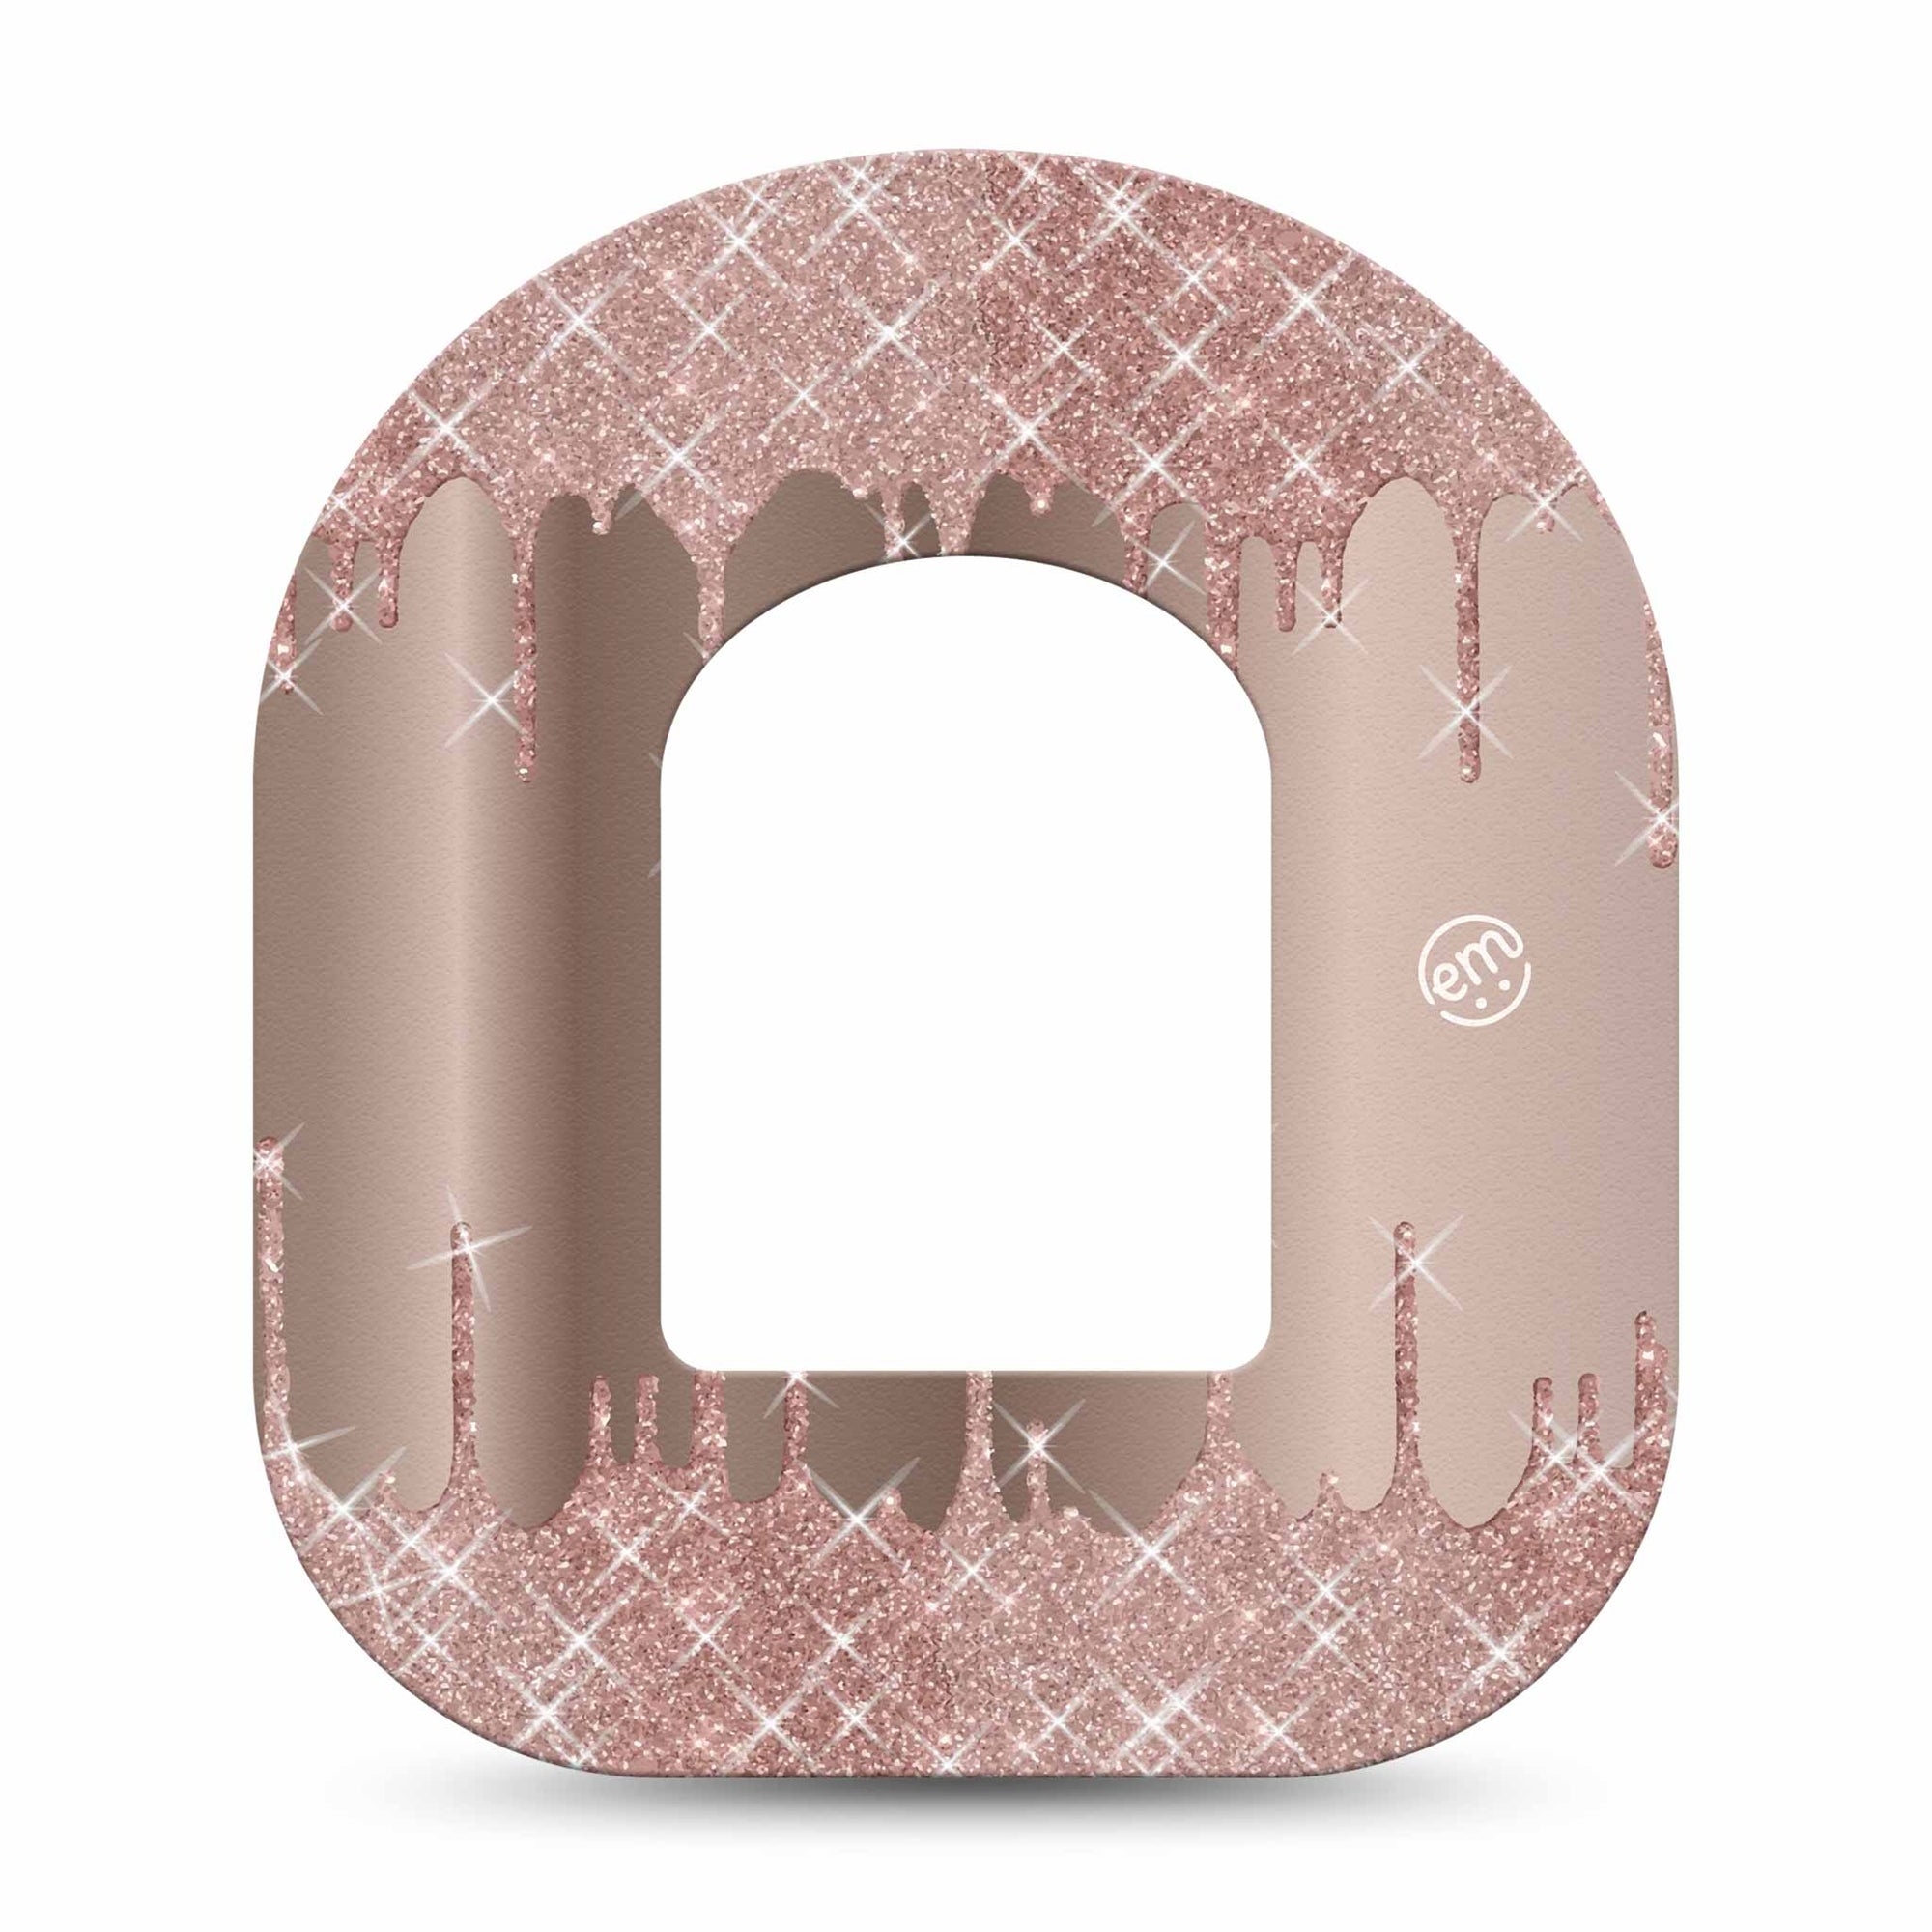 ExpressionMed Dripping Sparkles Pod Tape